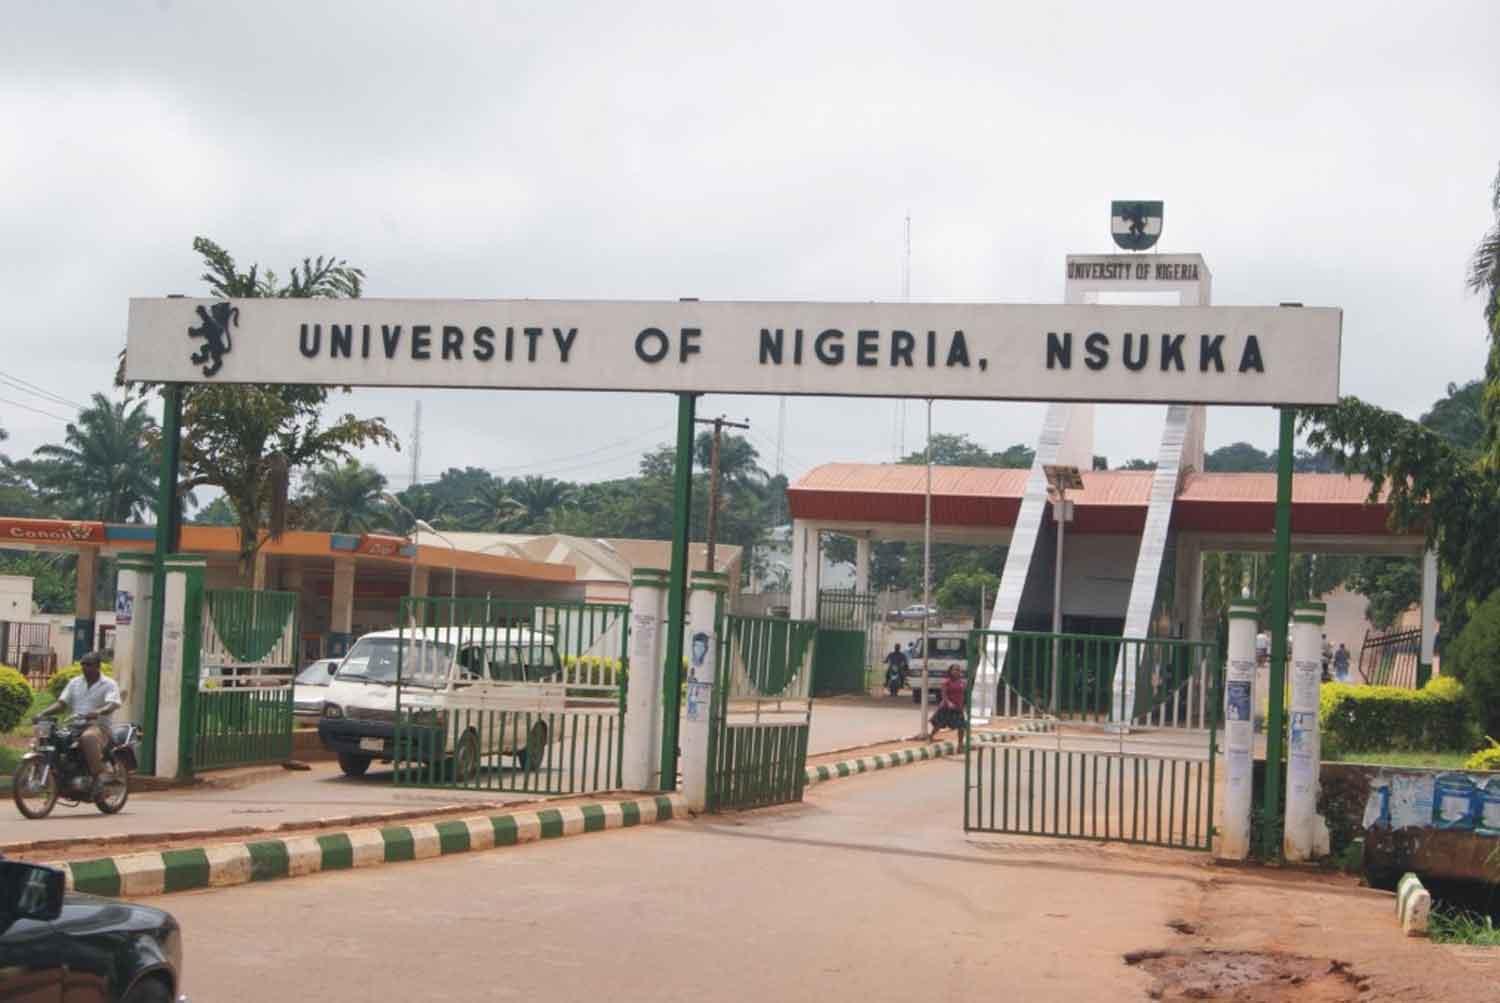 UNN Releases Statement On Student Who Twerked In Viral Video